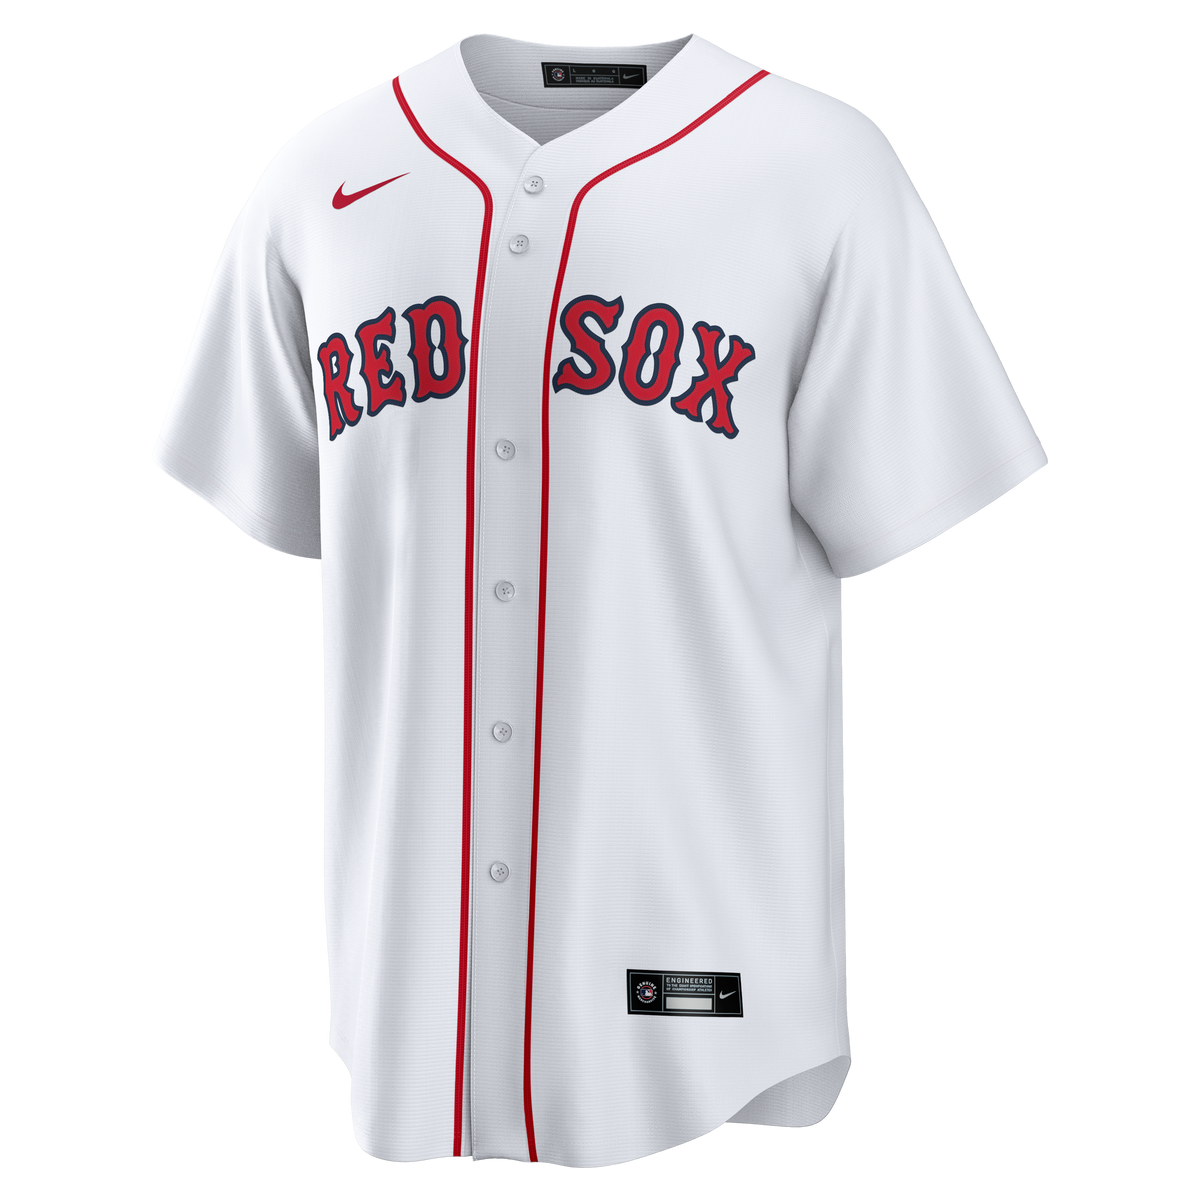 Rafael Devers #11 New York Yankees at Boston Red Sox June 18, 2023, Game 2  Game Used City Connect Jersey, Size 46, 1 for 3, 1 run